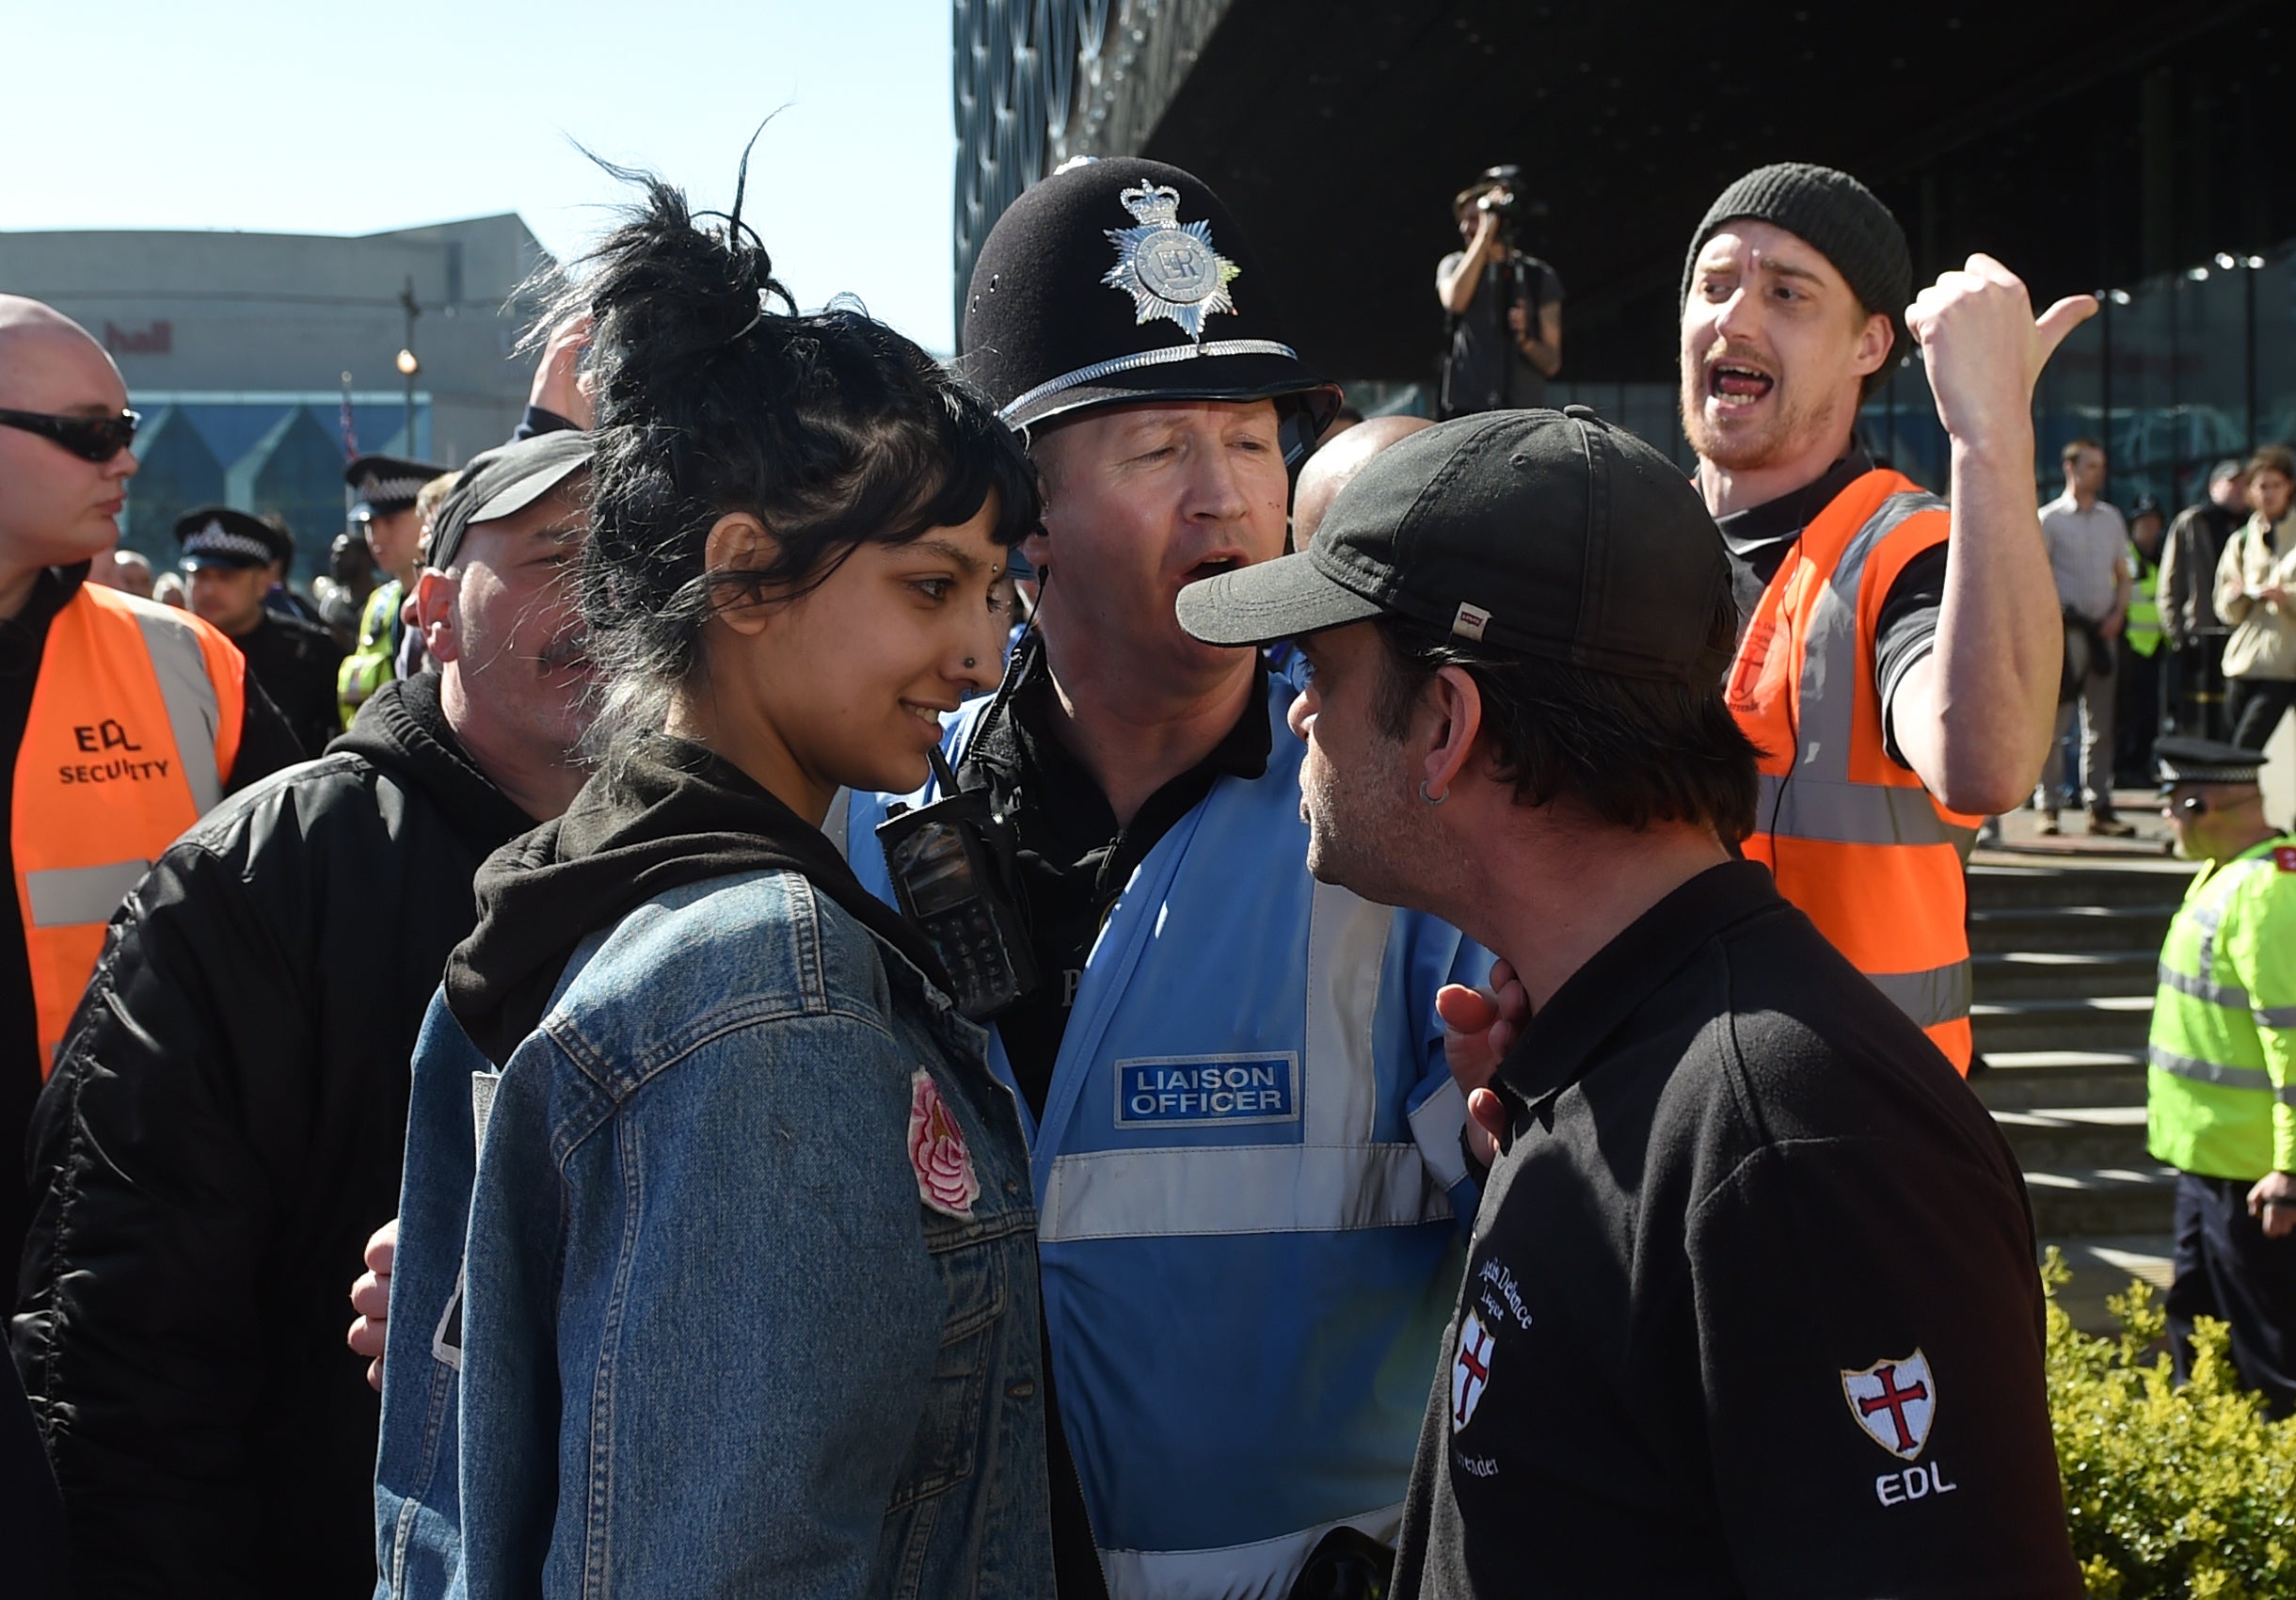 Saffiyah Khan came to the aid of Ms Khan - and went viral as a result